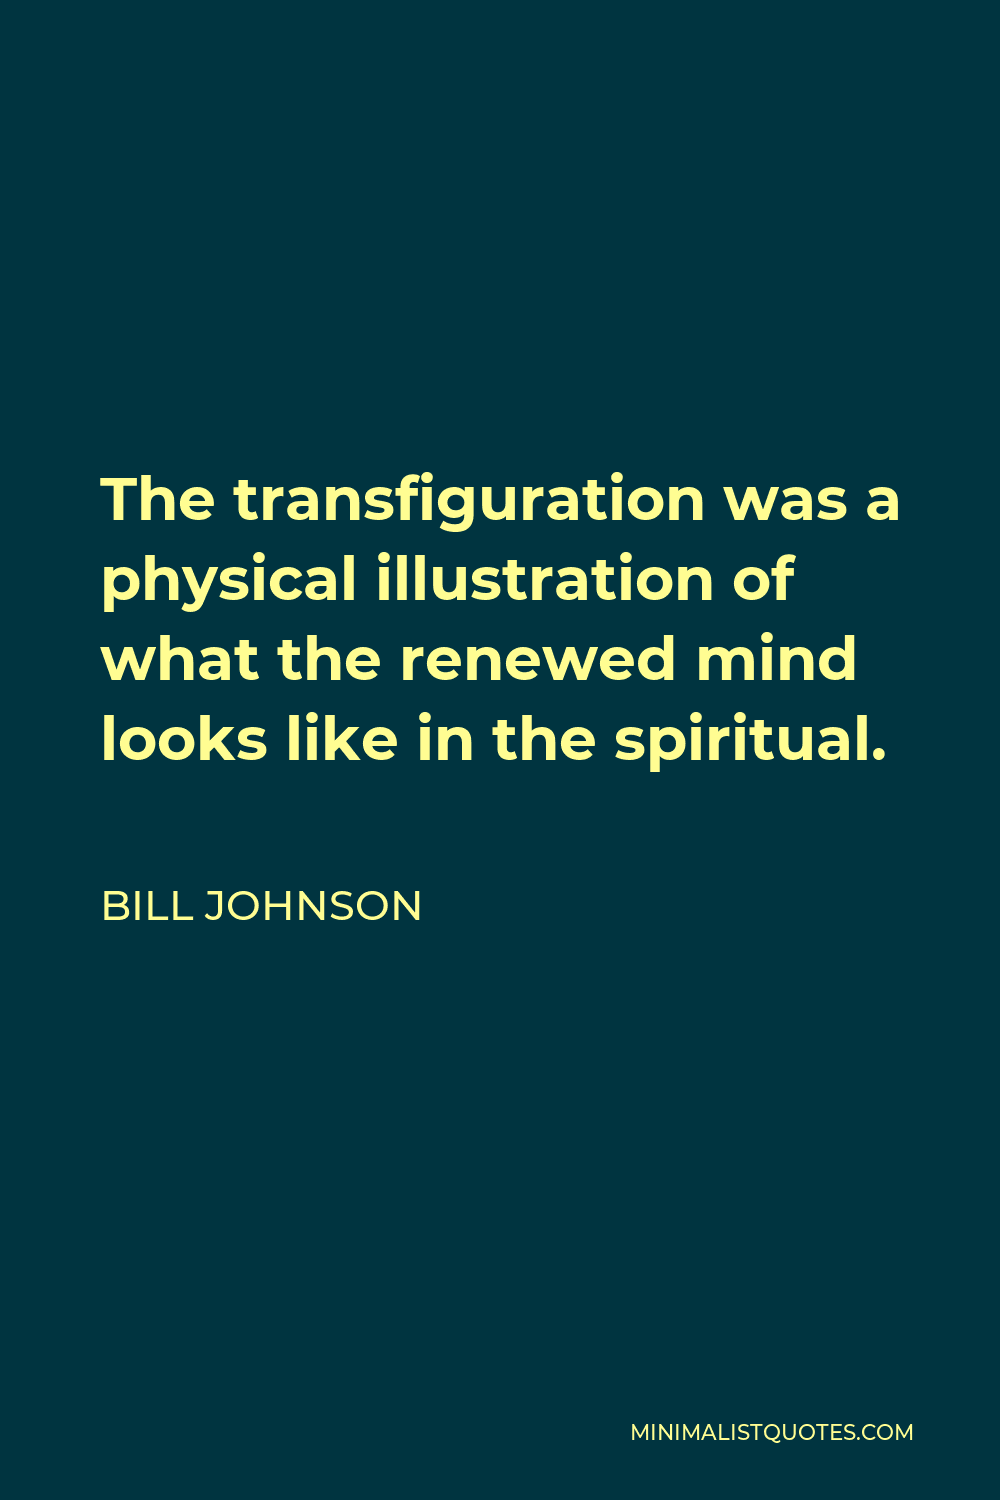 Bill Johnson Quote - The transfiguration was a physical illustration of what the renewed mind looks like in the spiritual.